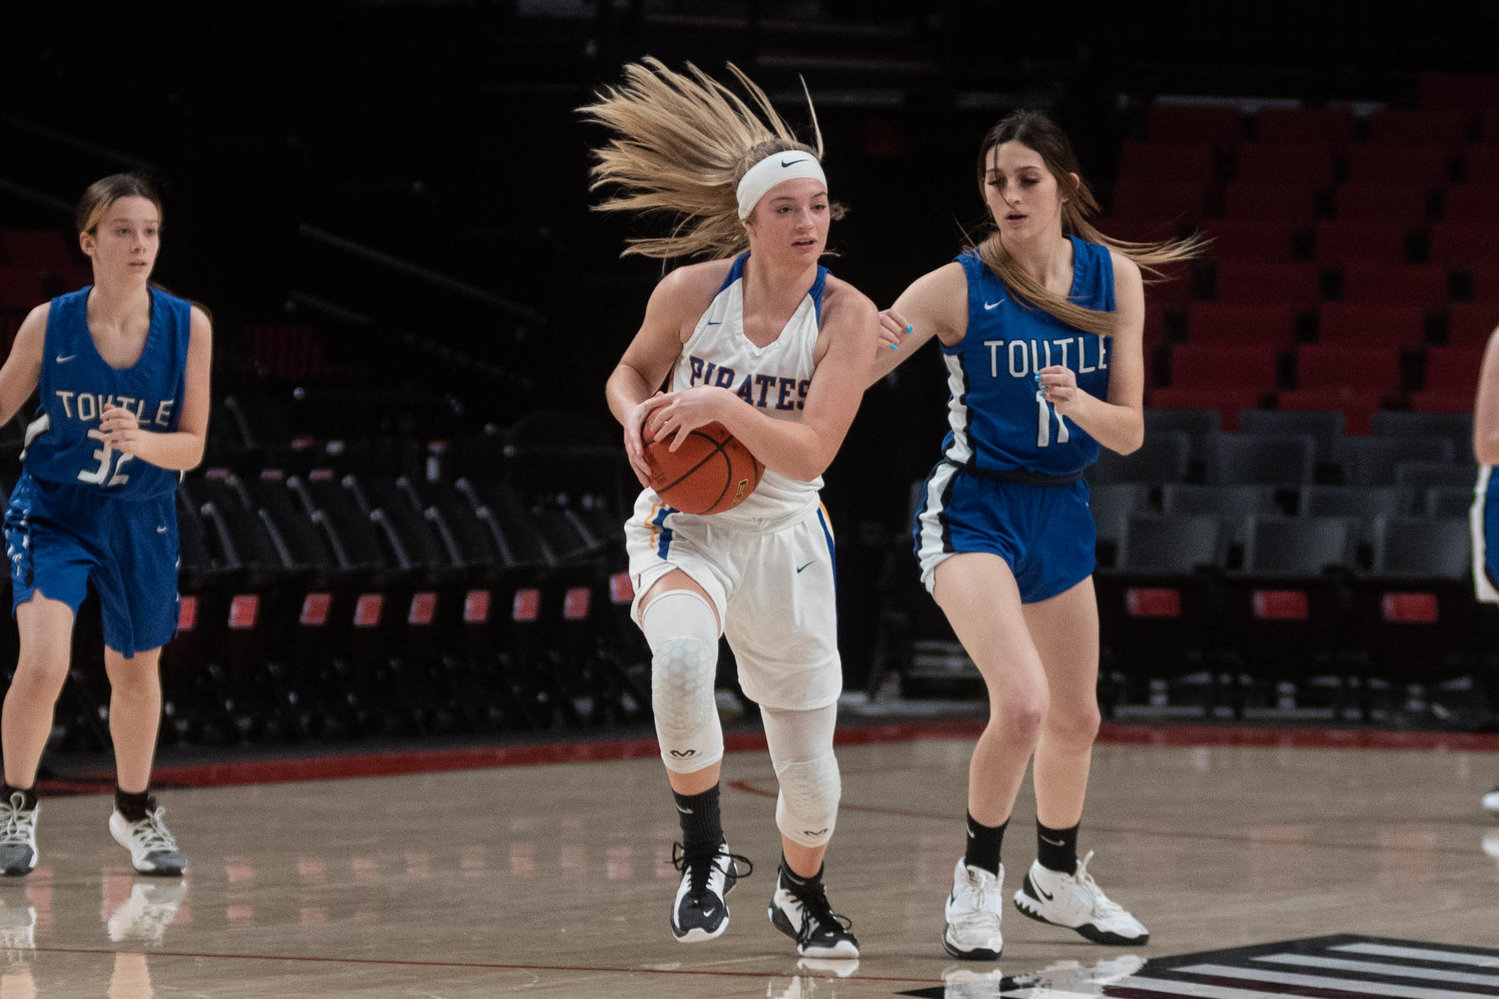 Adna guard Kaylin Todd takes the ball away from a Toutle Lake player at the Moda Center in Portland Dec. 18.